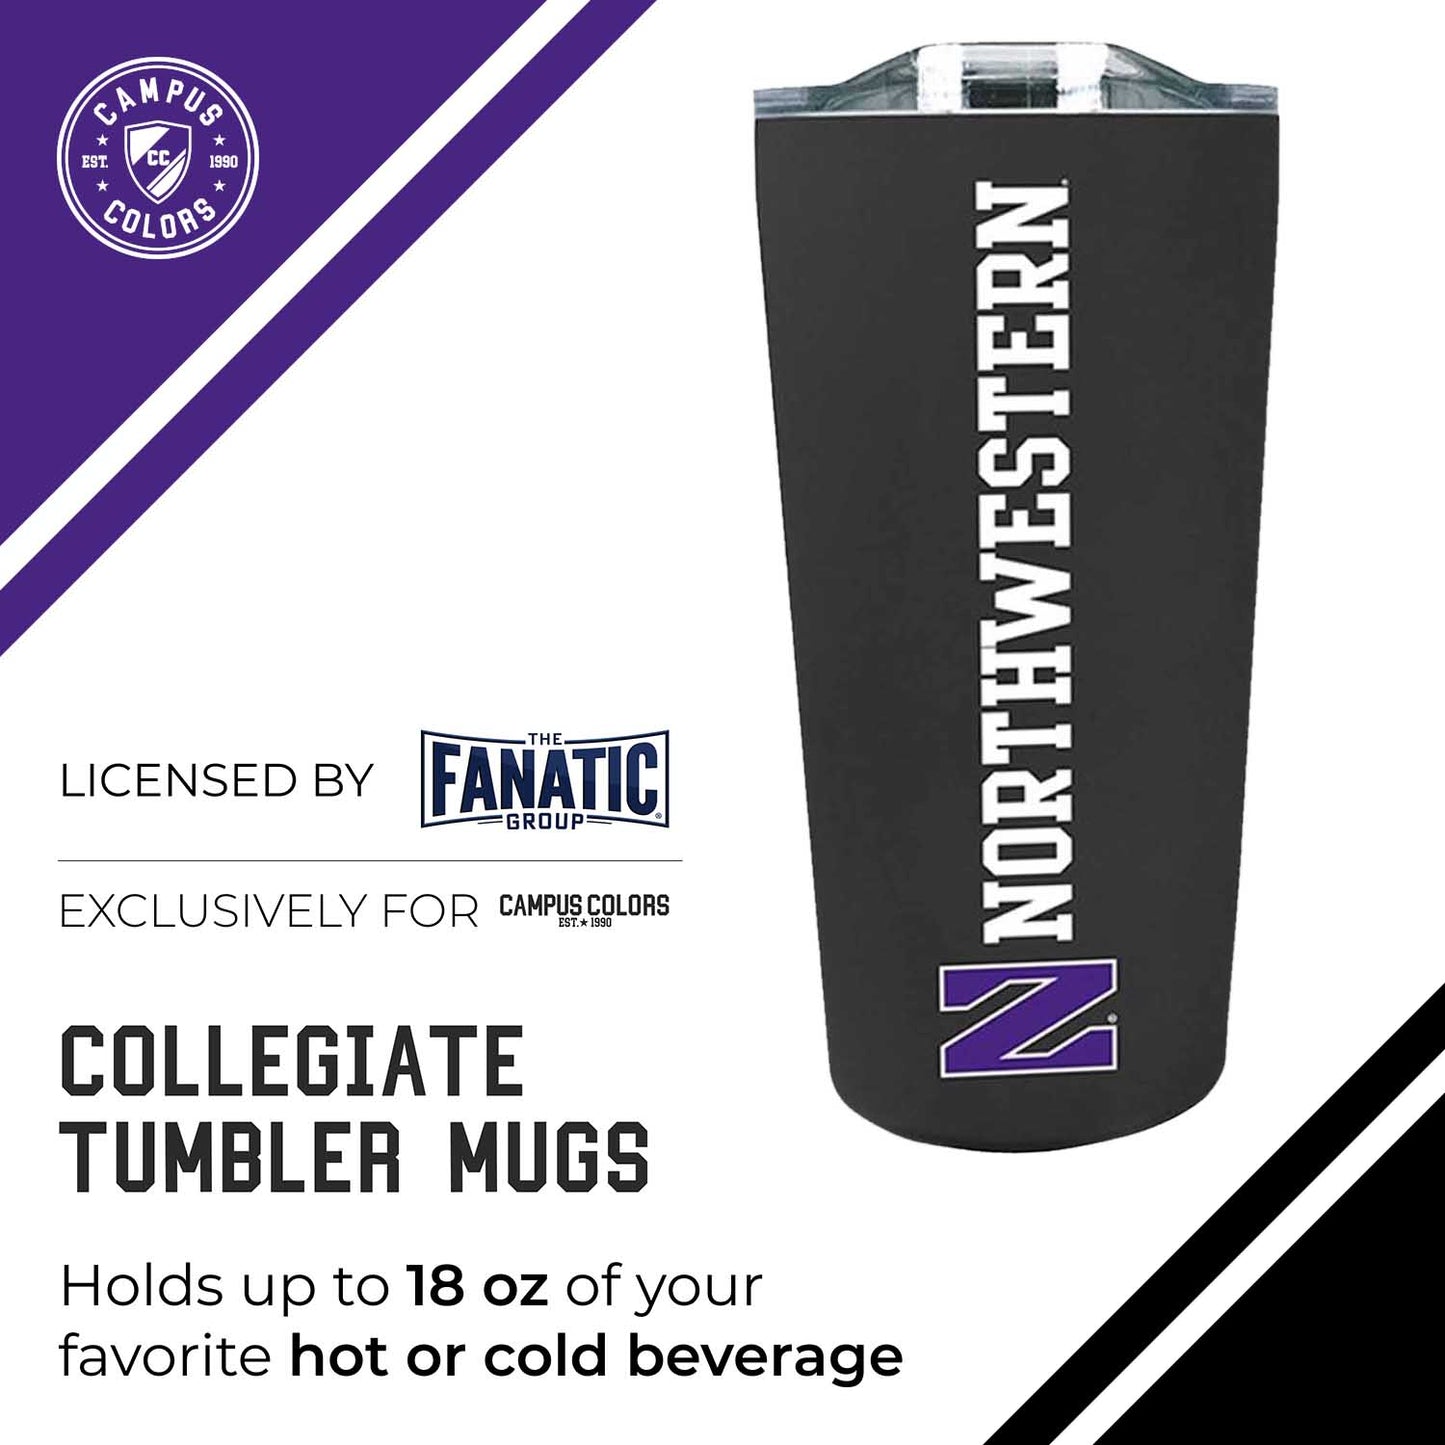 Northwestern Wildcats NCAA Stainless Steel Tumbler perfect for Gameday - Black